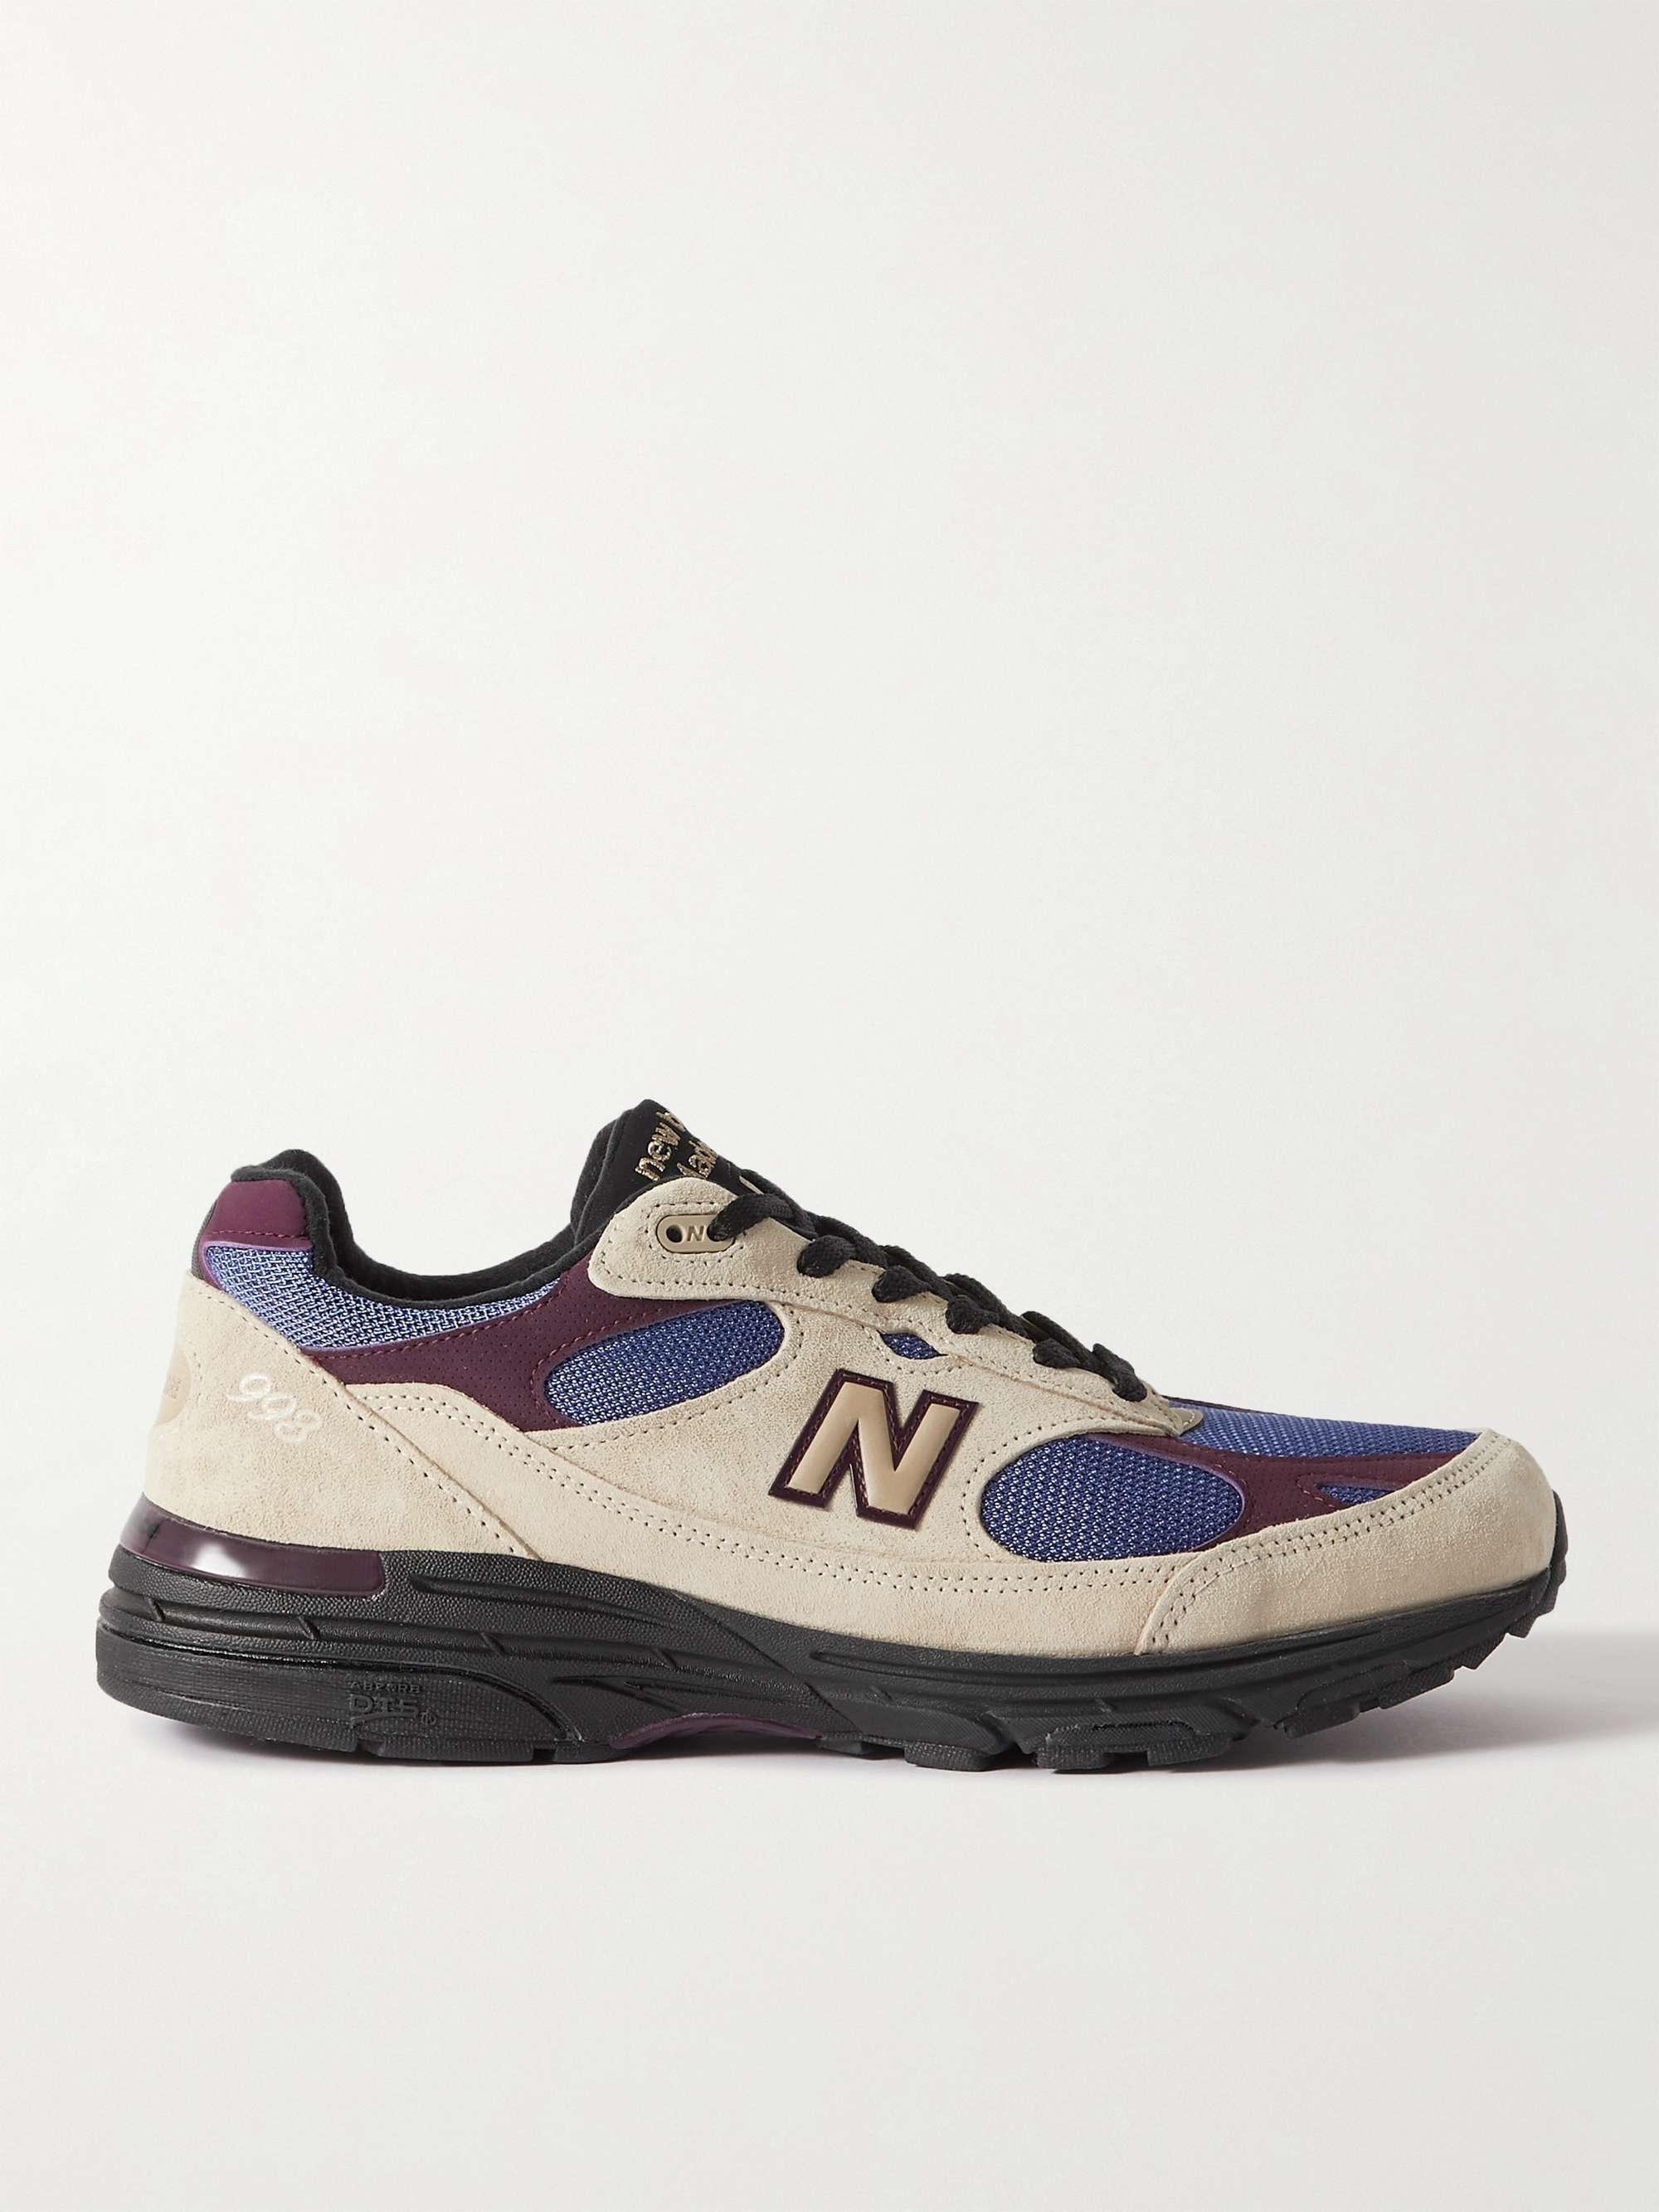 NEW BALANCE + Aimé Leon Dore 993 Suede and Mesh Sneakers | MR PORTER